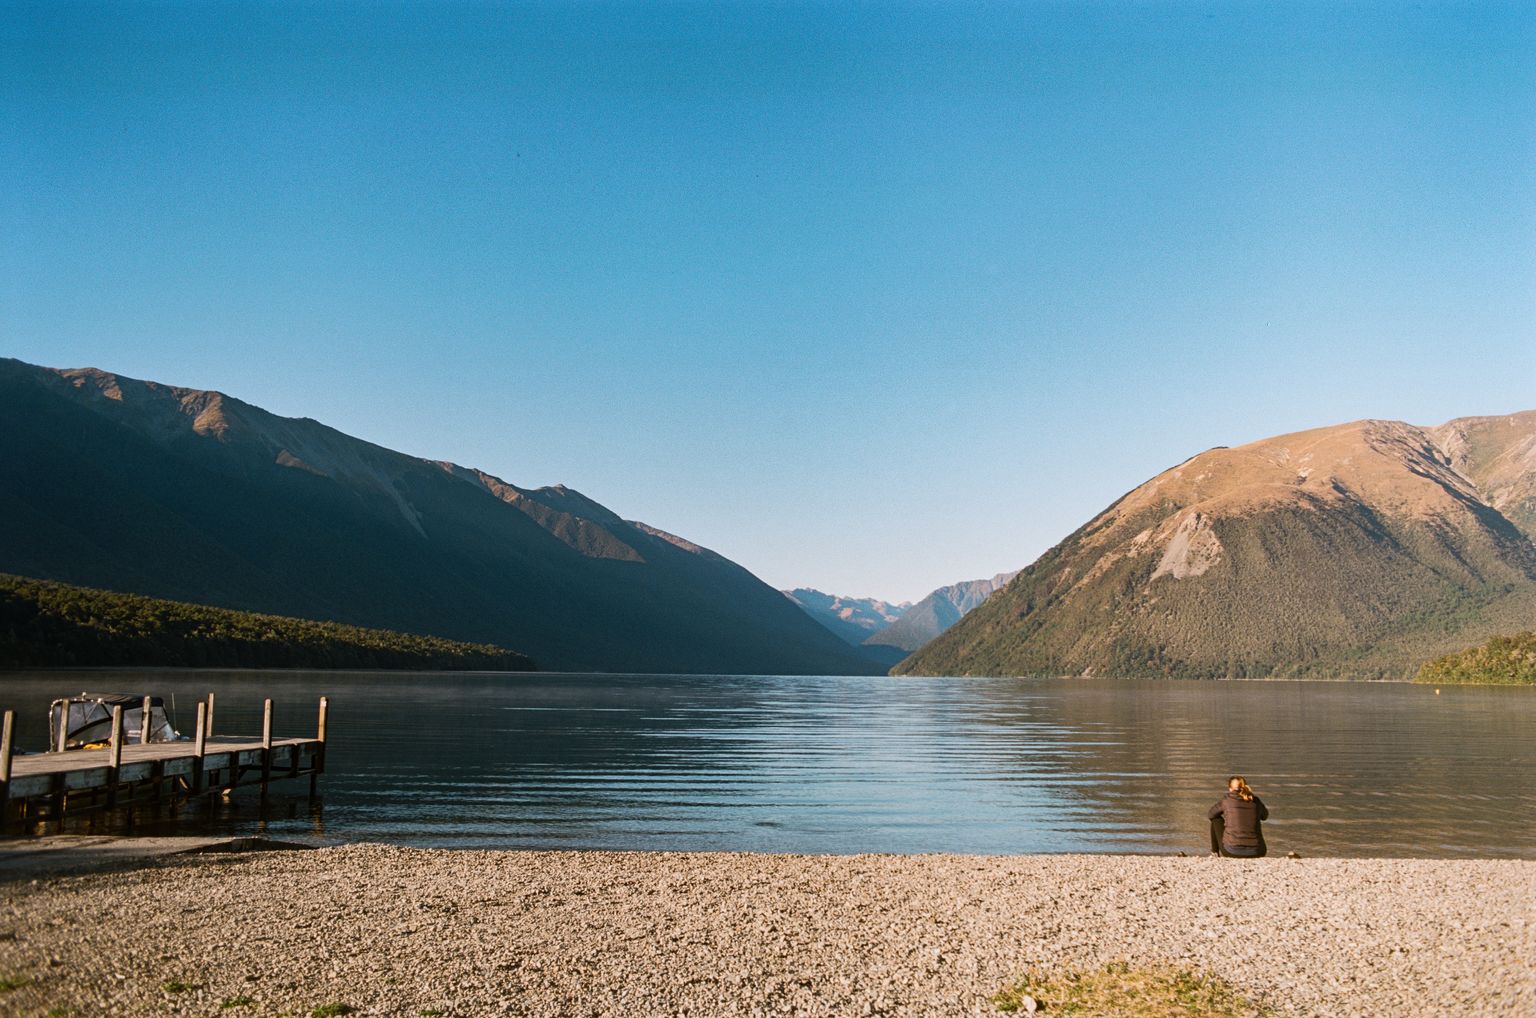 A girl sits, back turned to the camera, on the shore of a glacial lake, looking out into the mountains that frame the lake in the horizon. A dock extends a few meters into the lake on the left.